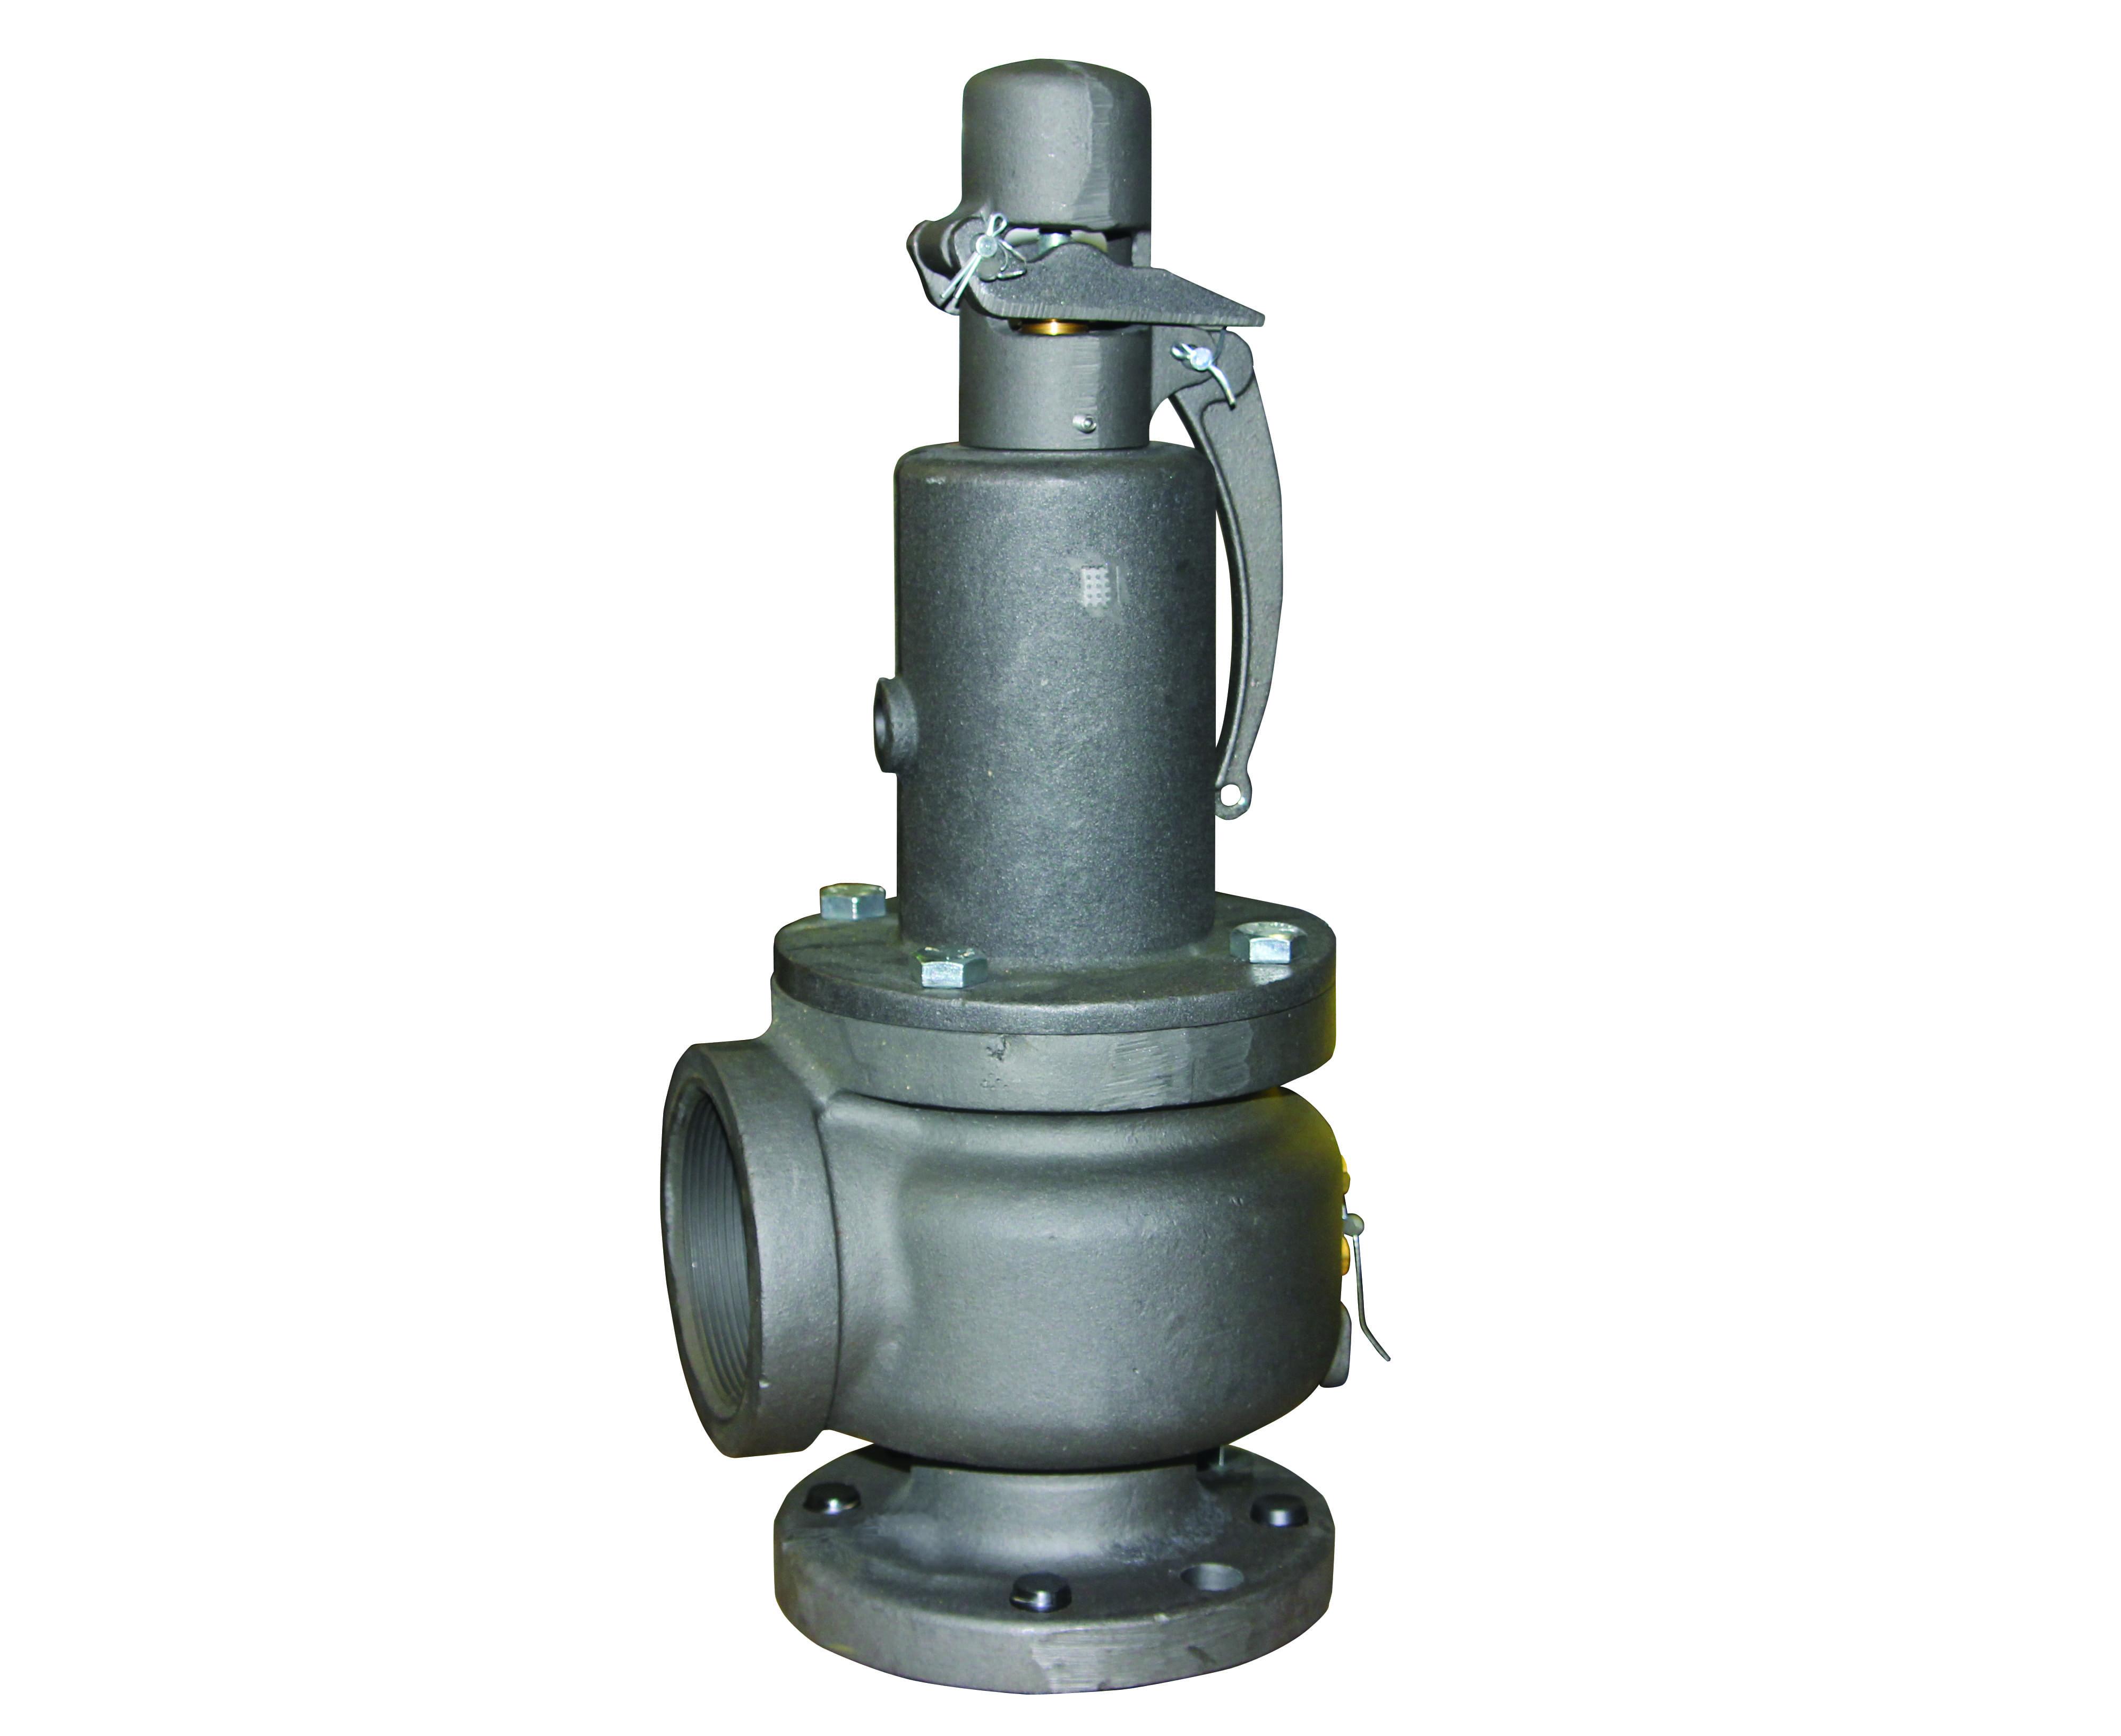 Preview image for Apollo ASME Section VIII Steam Cast Iron Safety Relief Valve, 4"  (Flange x FNPT)